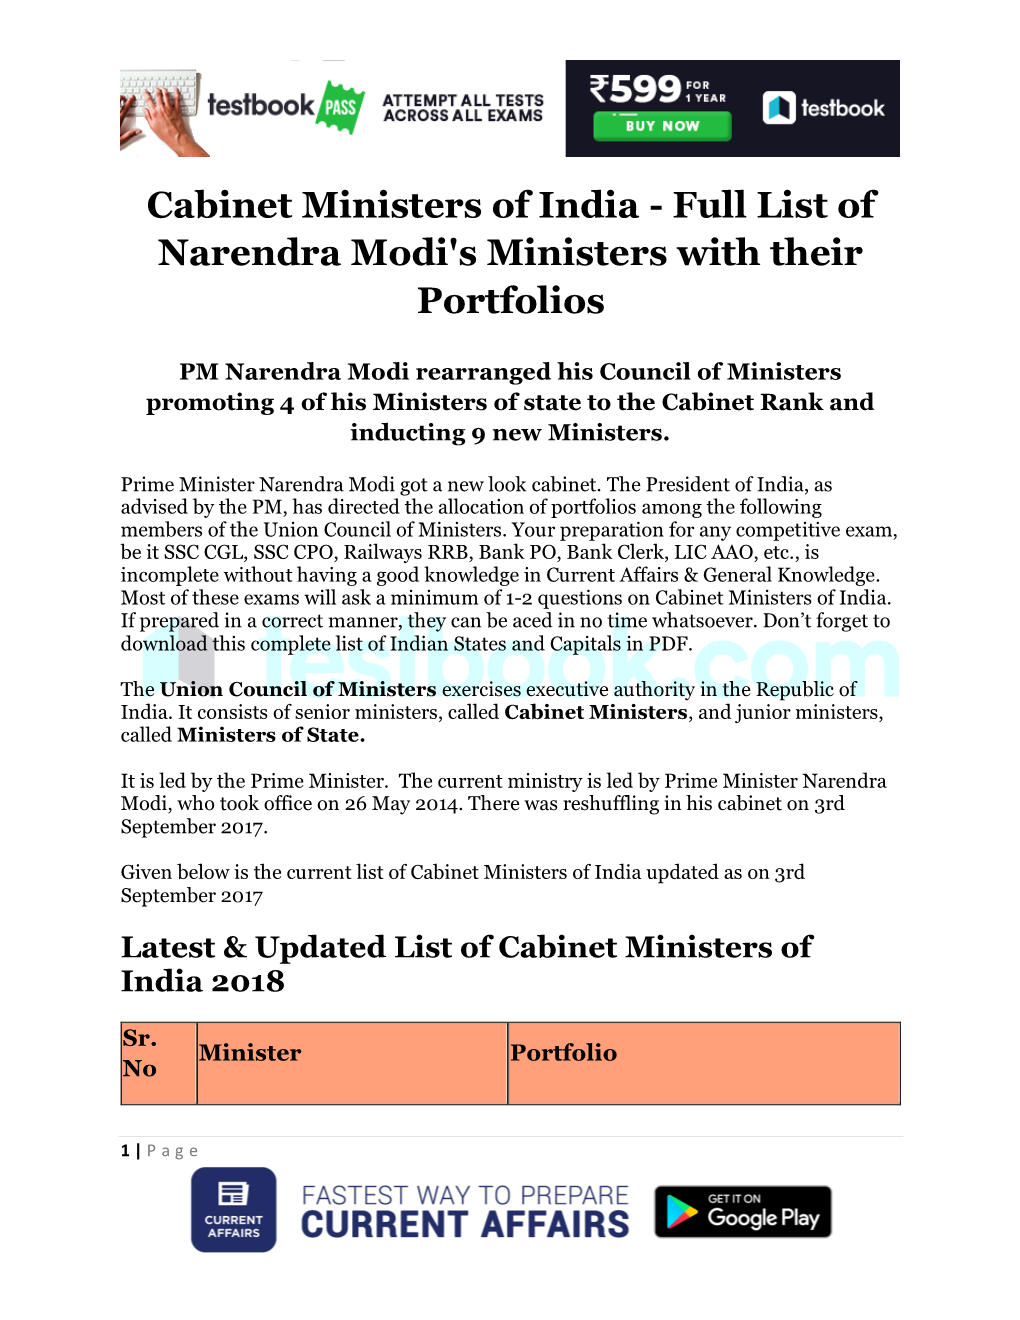 Cabinet Ministers of India - Full List of Narendra Modi's Ministers with Their Portfolios